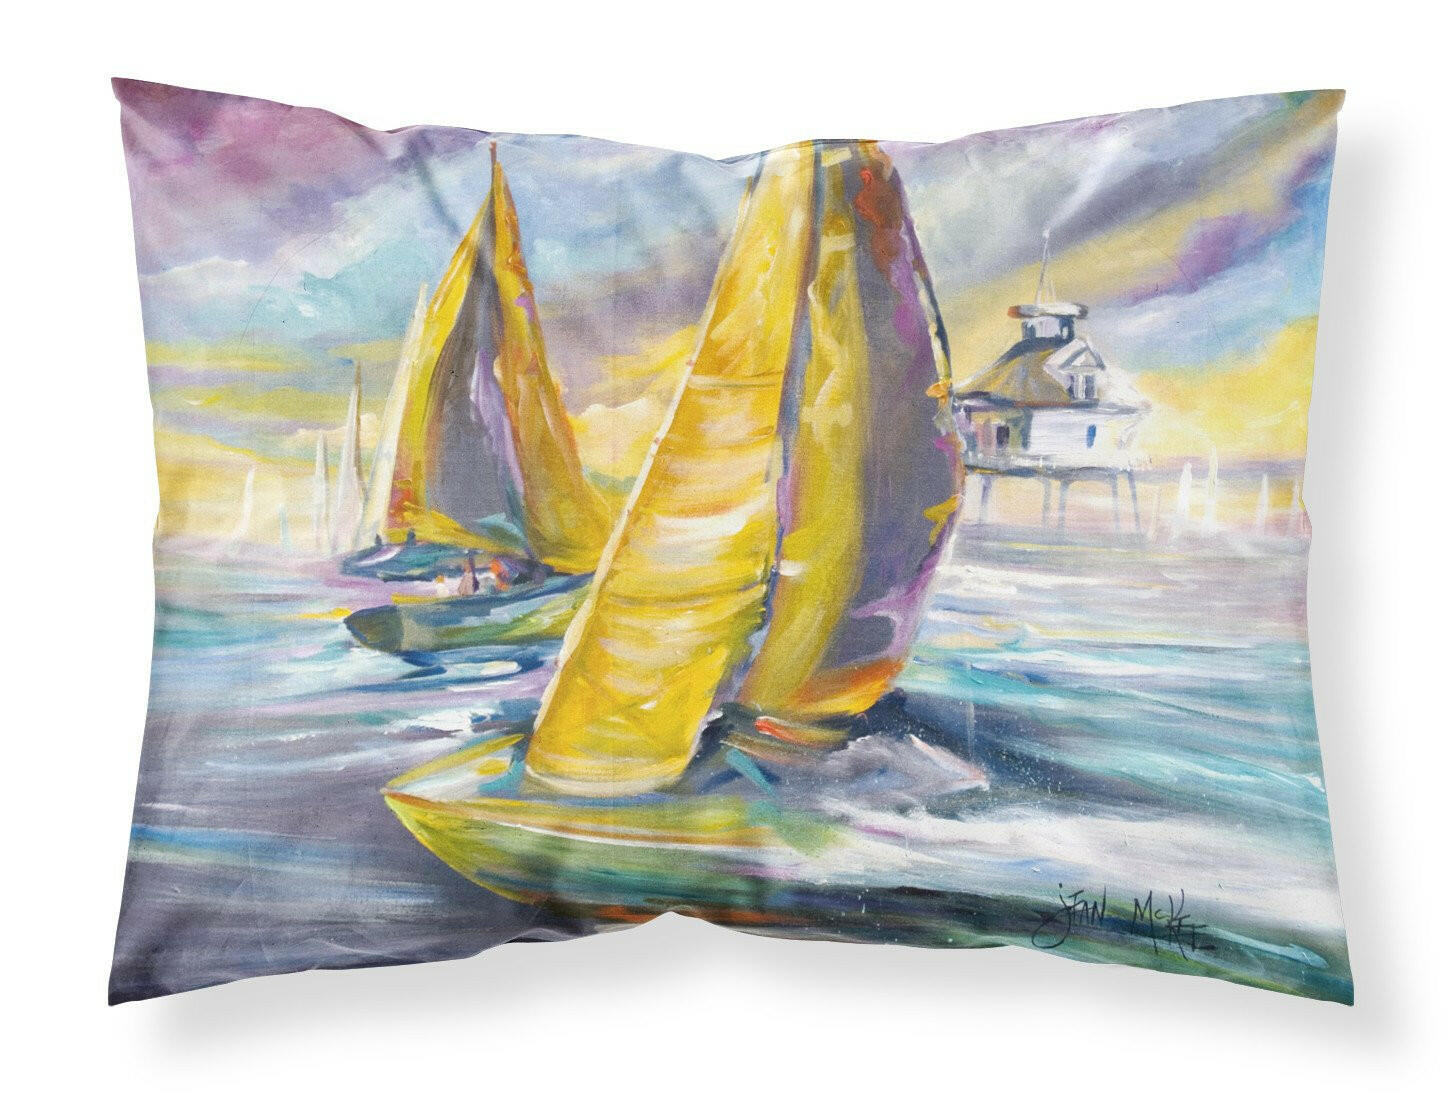 Sailboat with Middle Bay Lighthouse Fabric Standard Pillowcase JMK1061PILLOWCASE by Caroline's Treasures